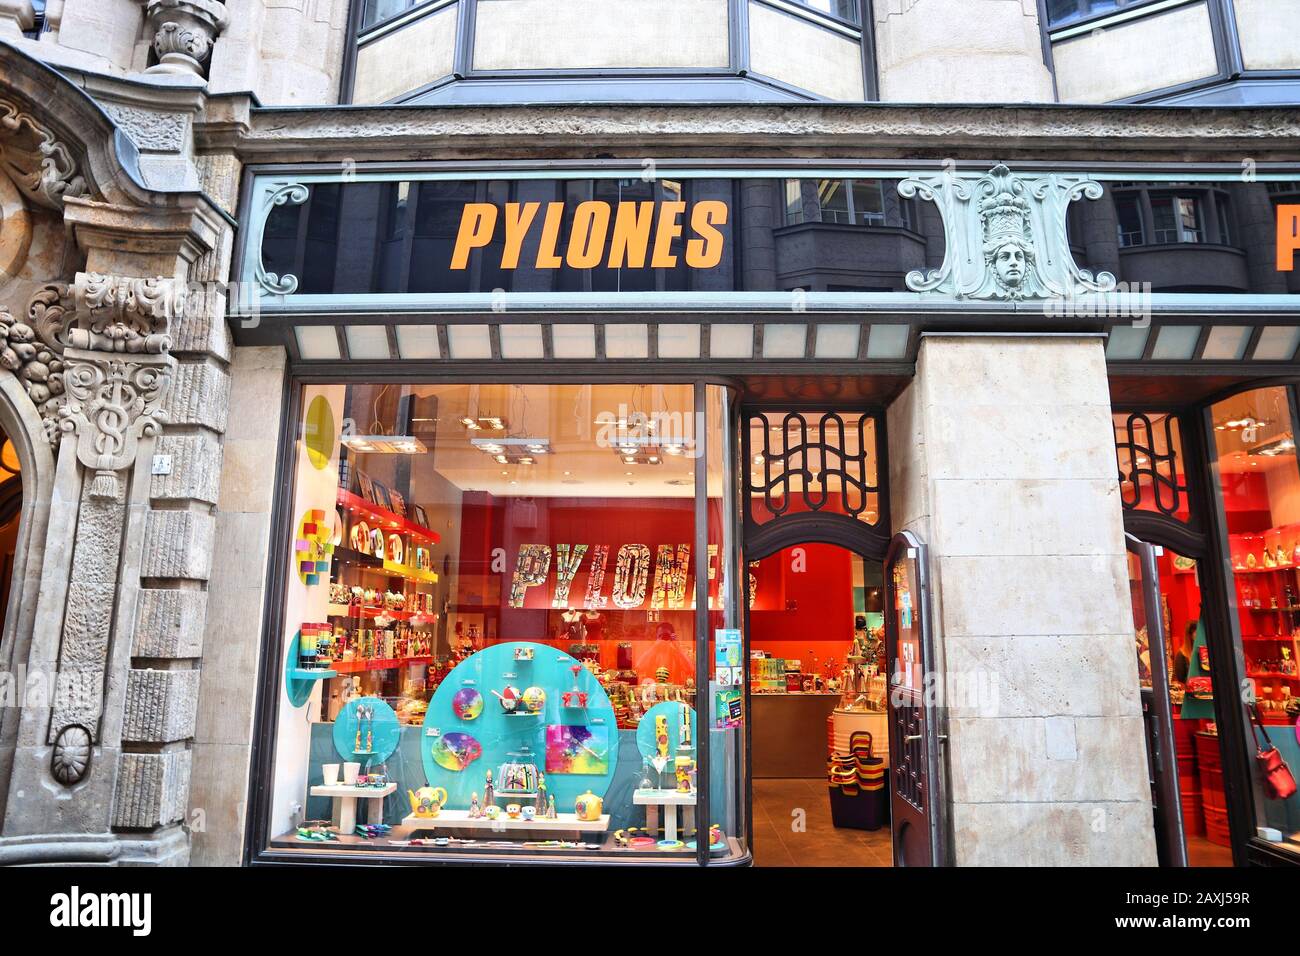 LEIPZIG, GERMANY - MAY 9, 2018: Pylones shop at Nikolai Street  (Nikolaistrasse) in Leipzig, Germany. Leipzig is the 10th biggest city in  Germany with Stock Photo - Alamy